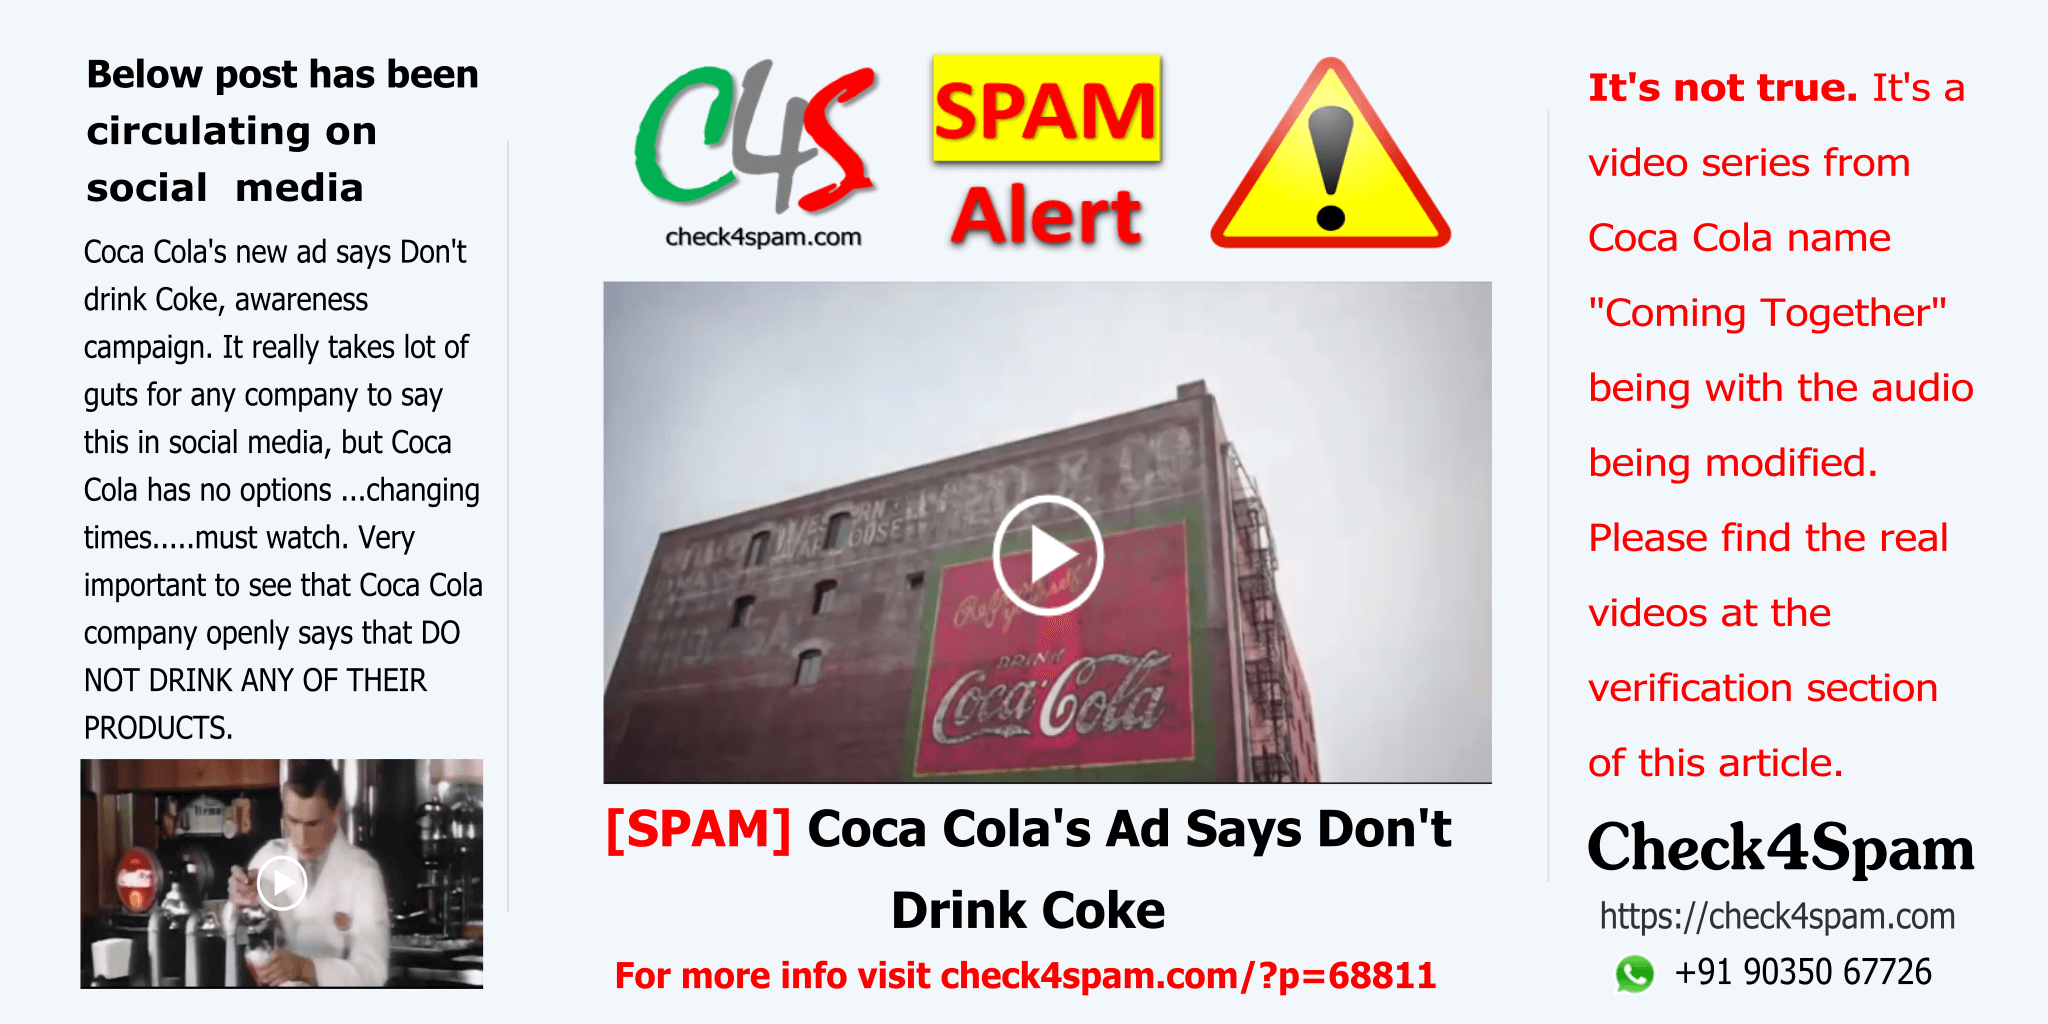 Coca Cola ad says Don't drink Coke - SPAM